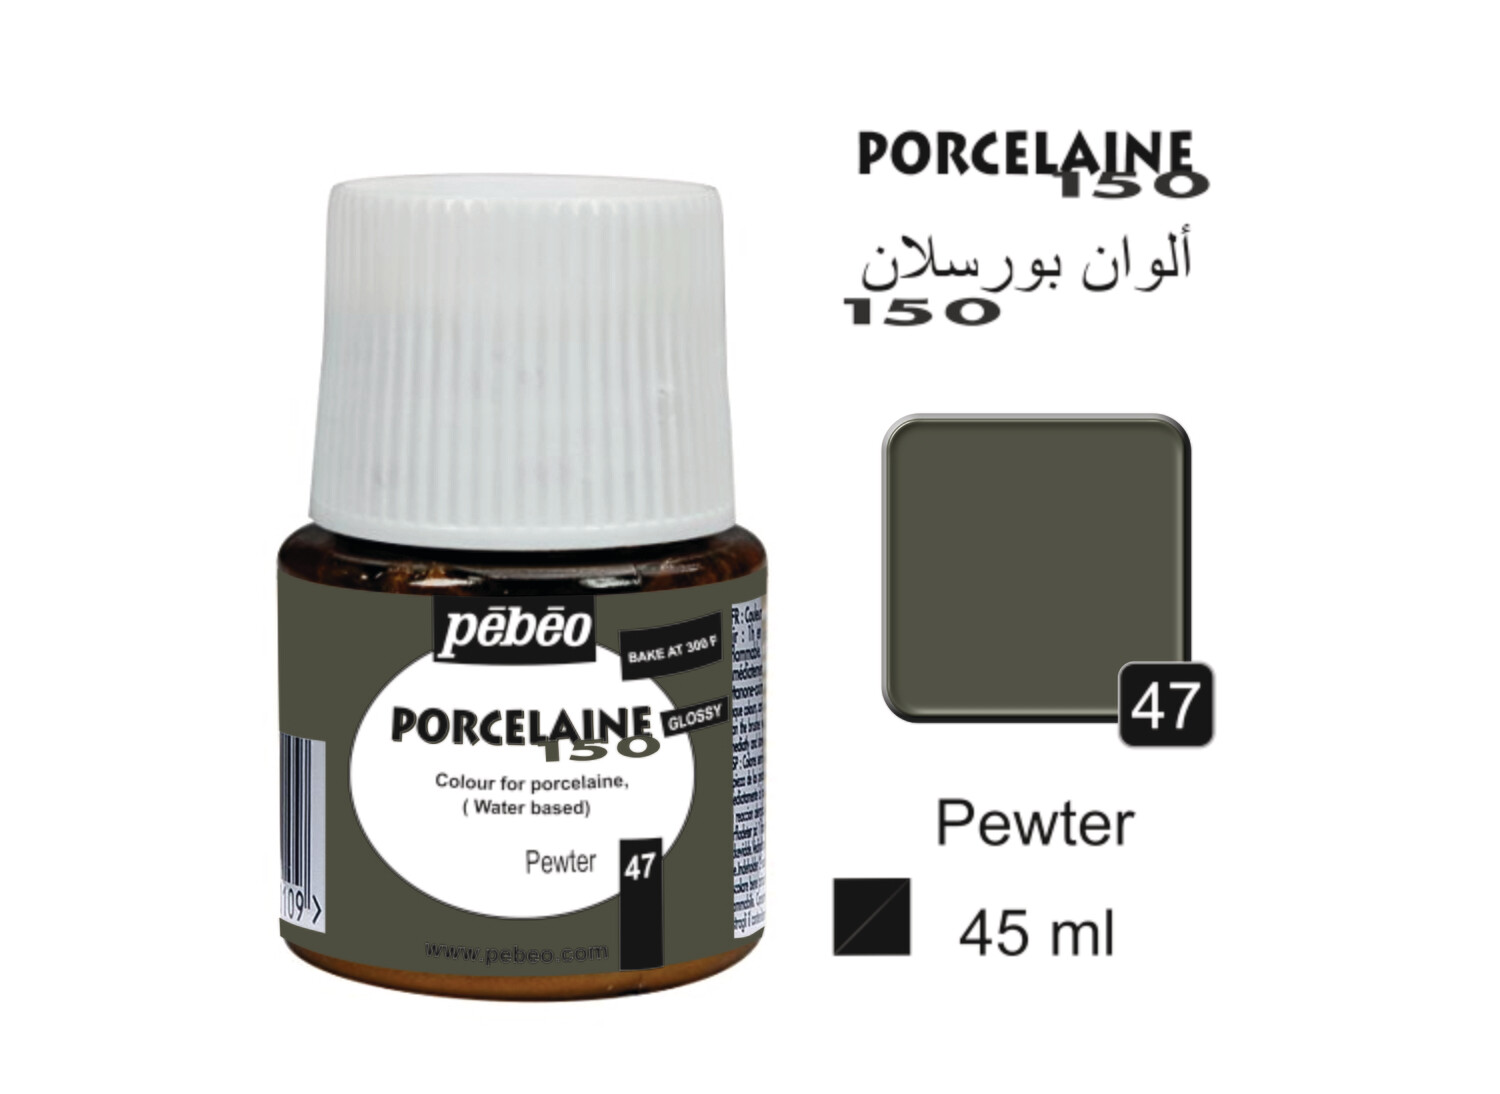 PORCELAINE 150, GLOSS 45 ml, Pewter No. 47